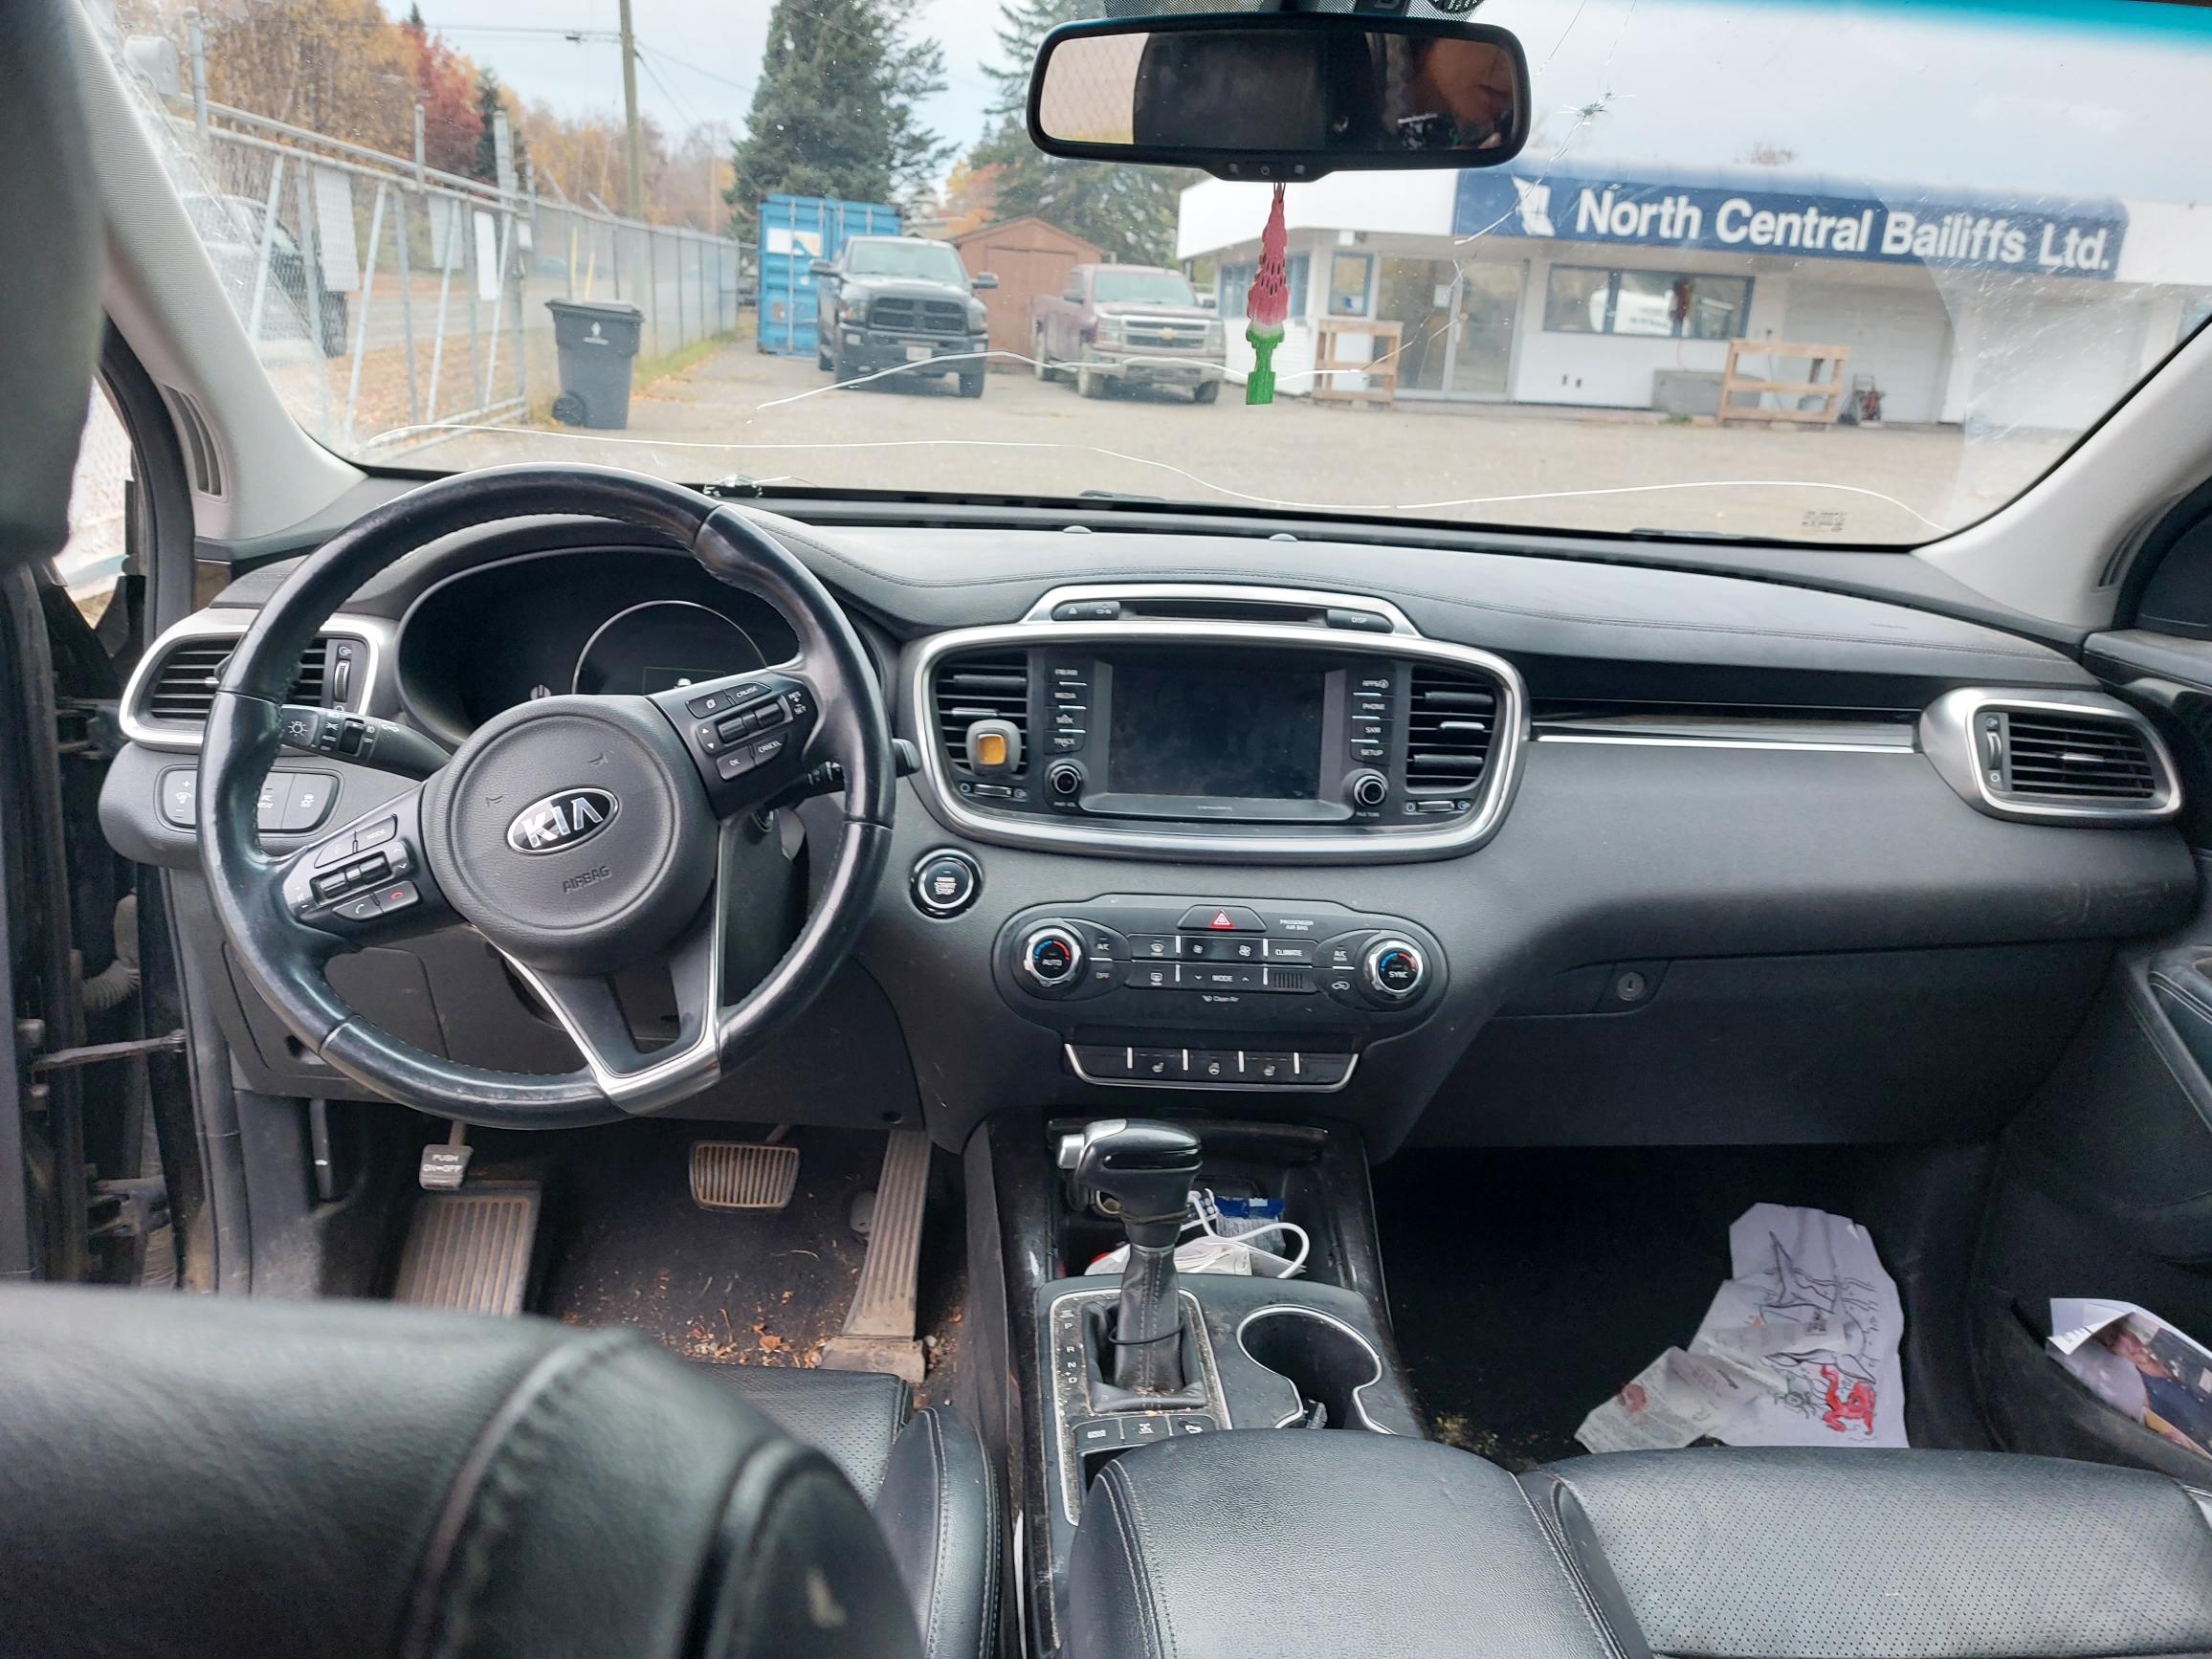 2018 Kia Sorento   B-PG-0679 *Re-Listed Located in Prince George